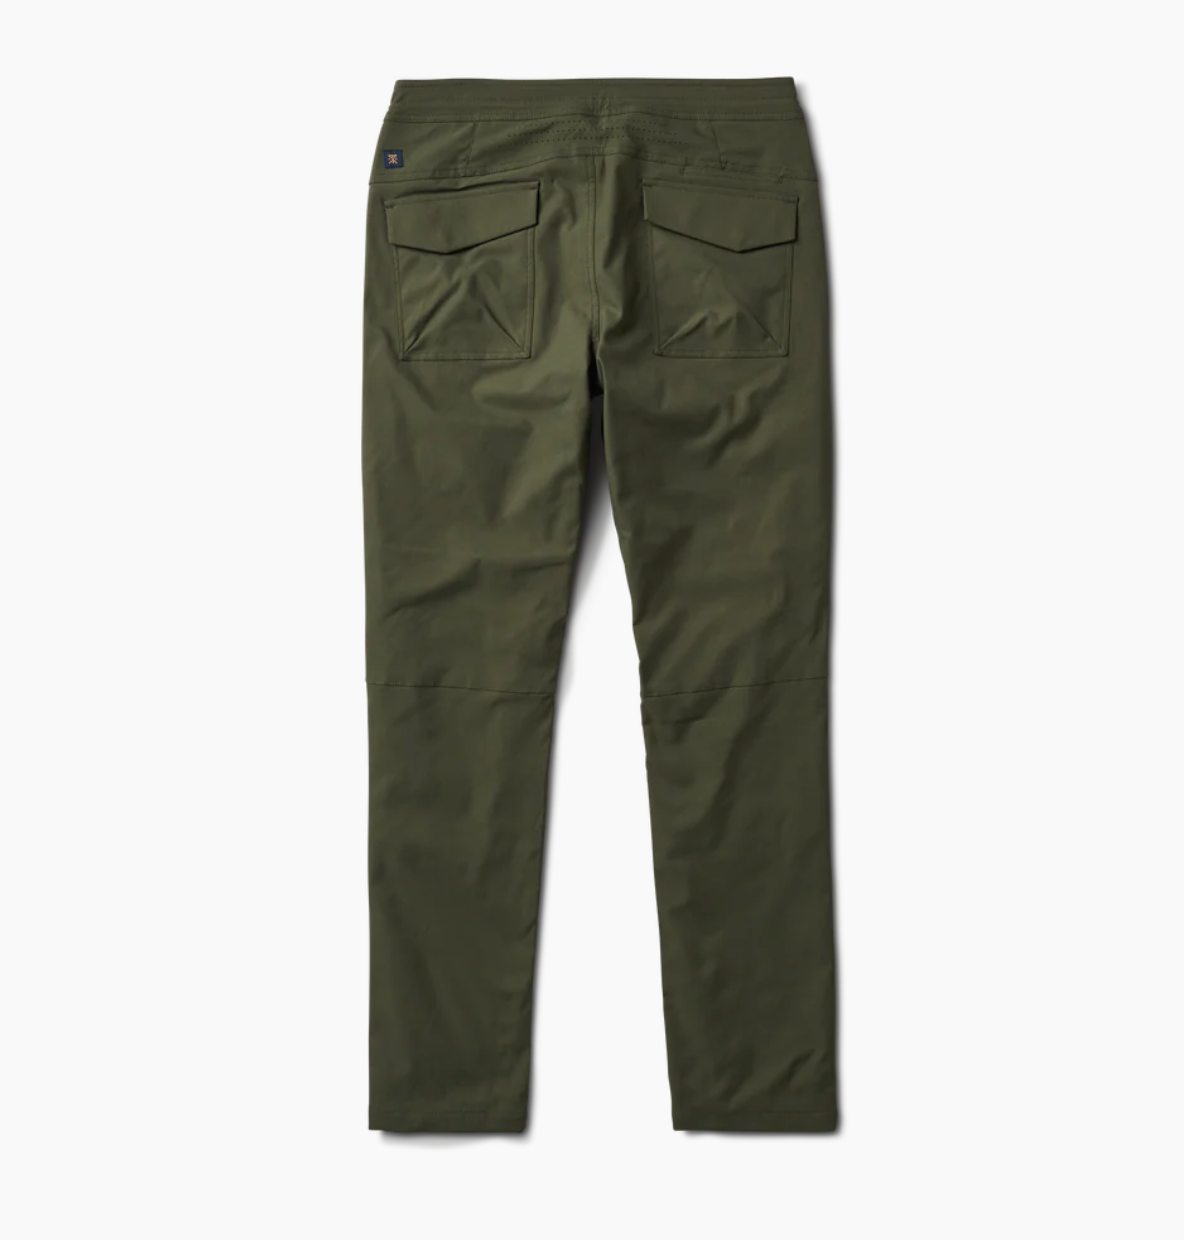 LAYOVER INSULATED PANTS - Mystery Made